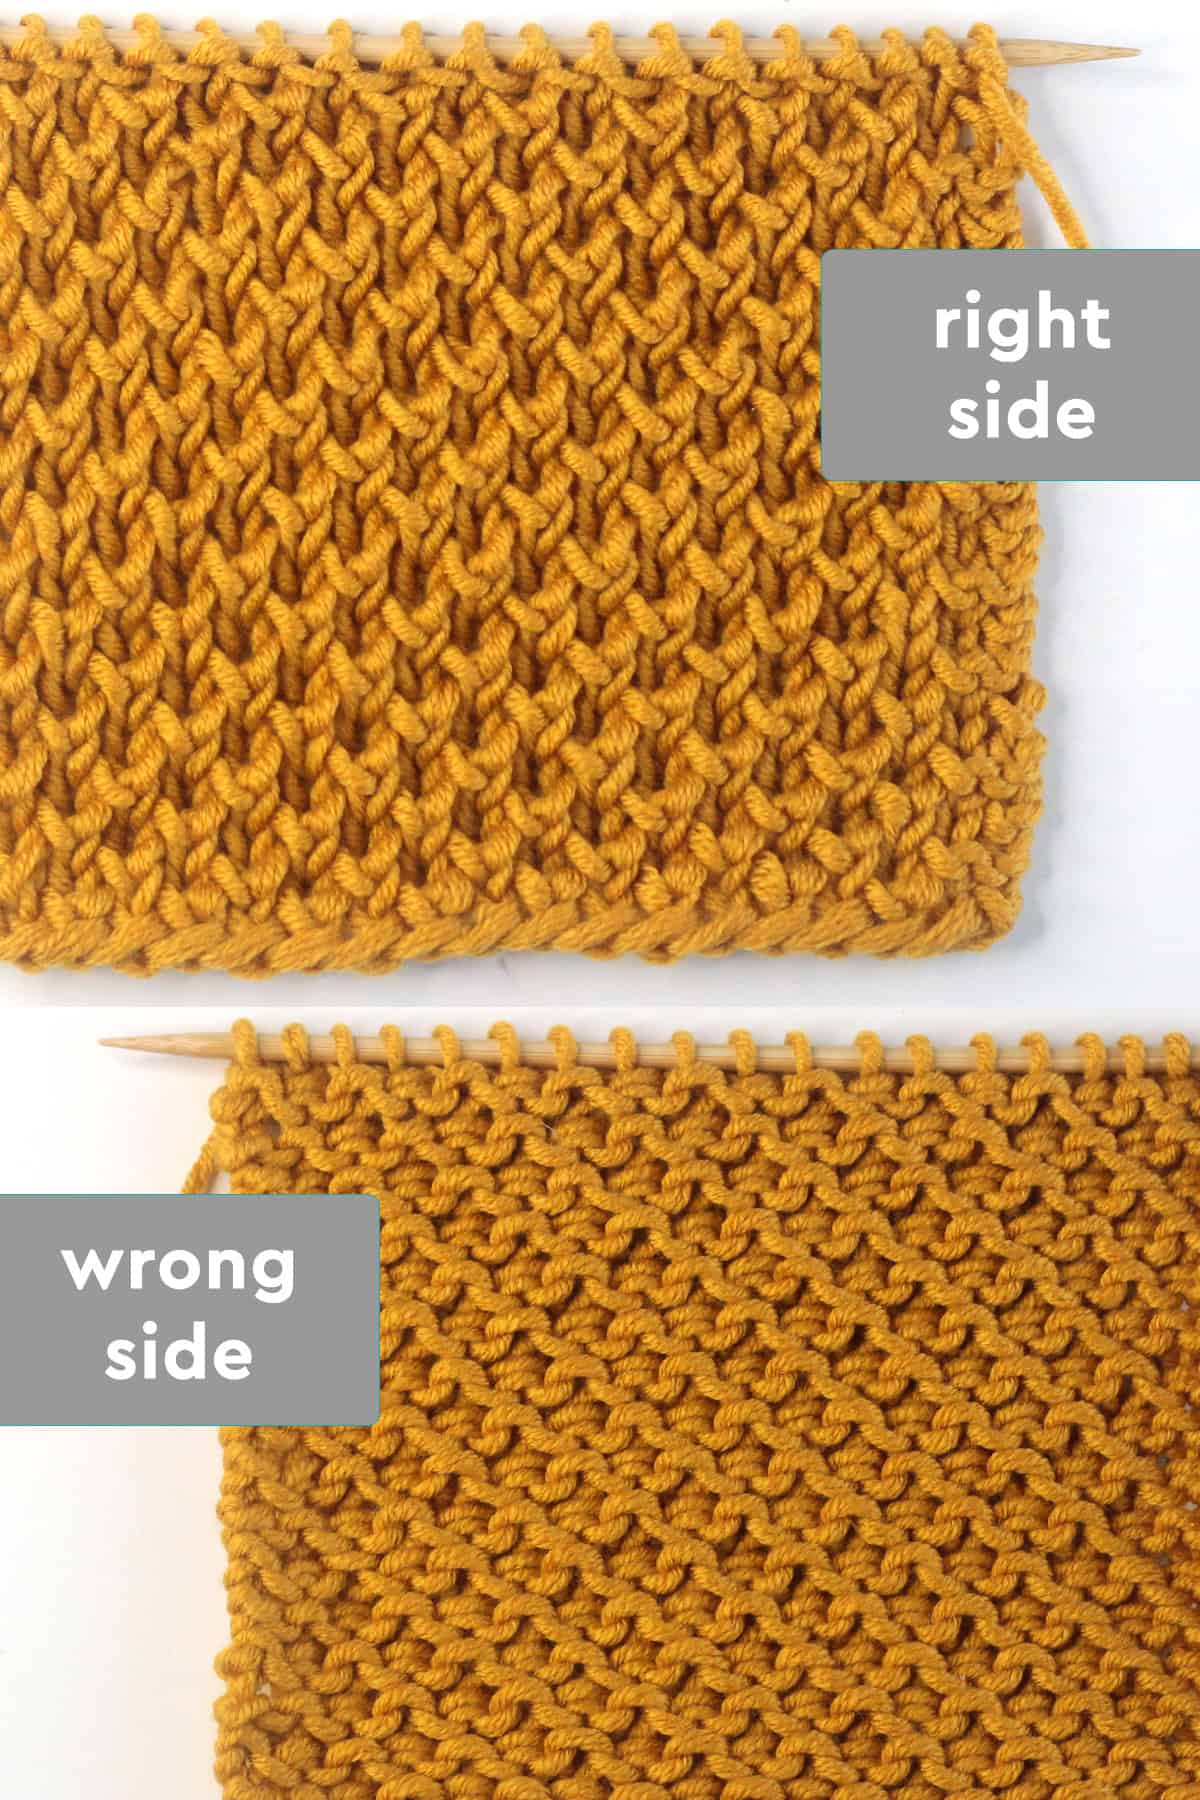 Right and Wrong sides of the Bee stitch brioche knit stitch pattern in yellow colored yarn.